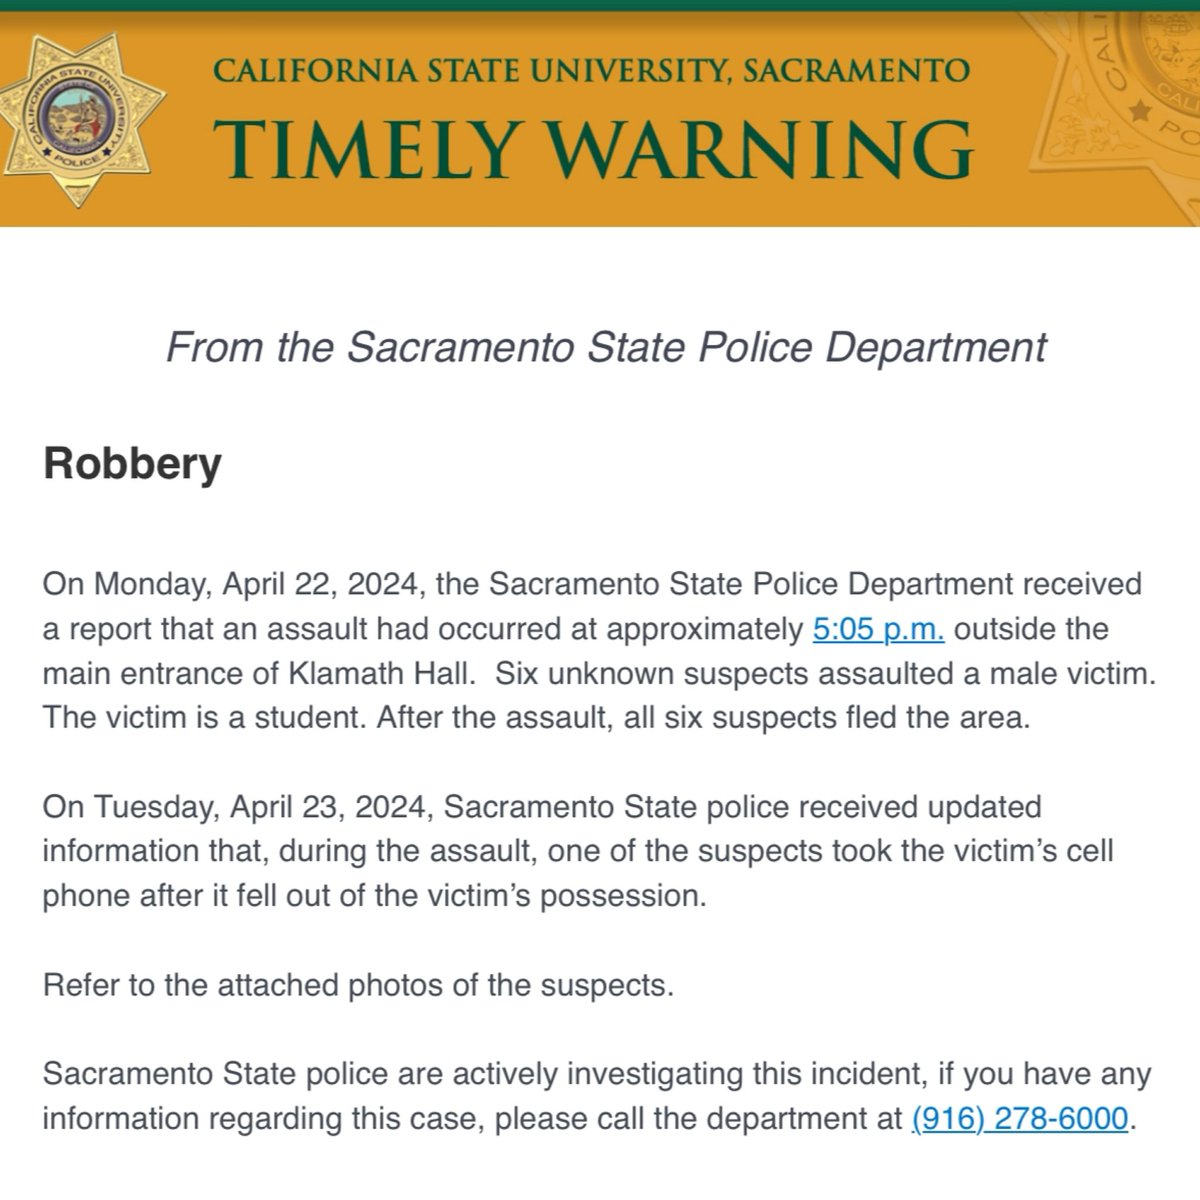 Timely warning from @sacstatepolice. For full message: t.e2ma.net/message/u6ah1f…